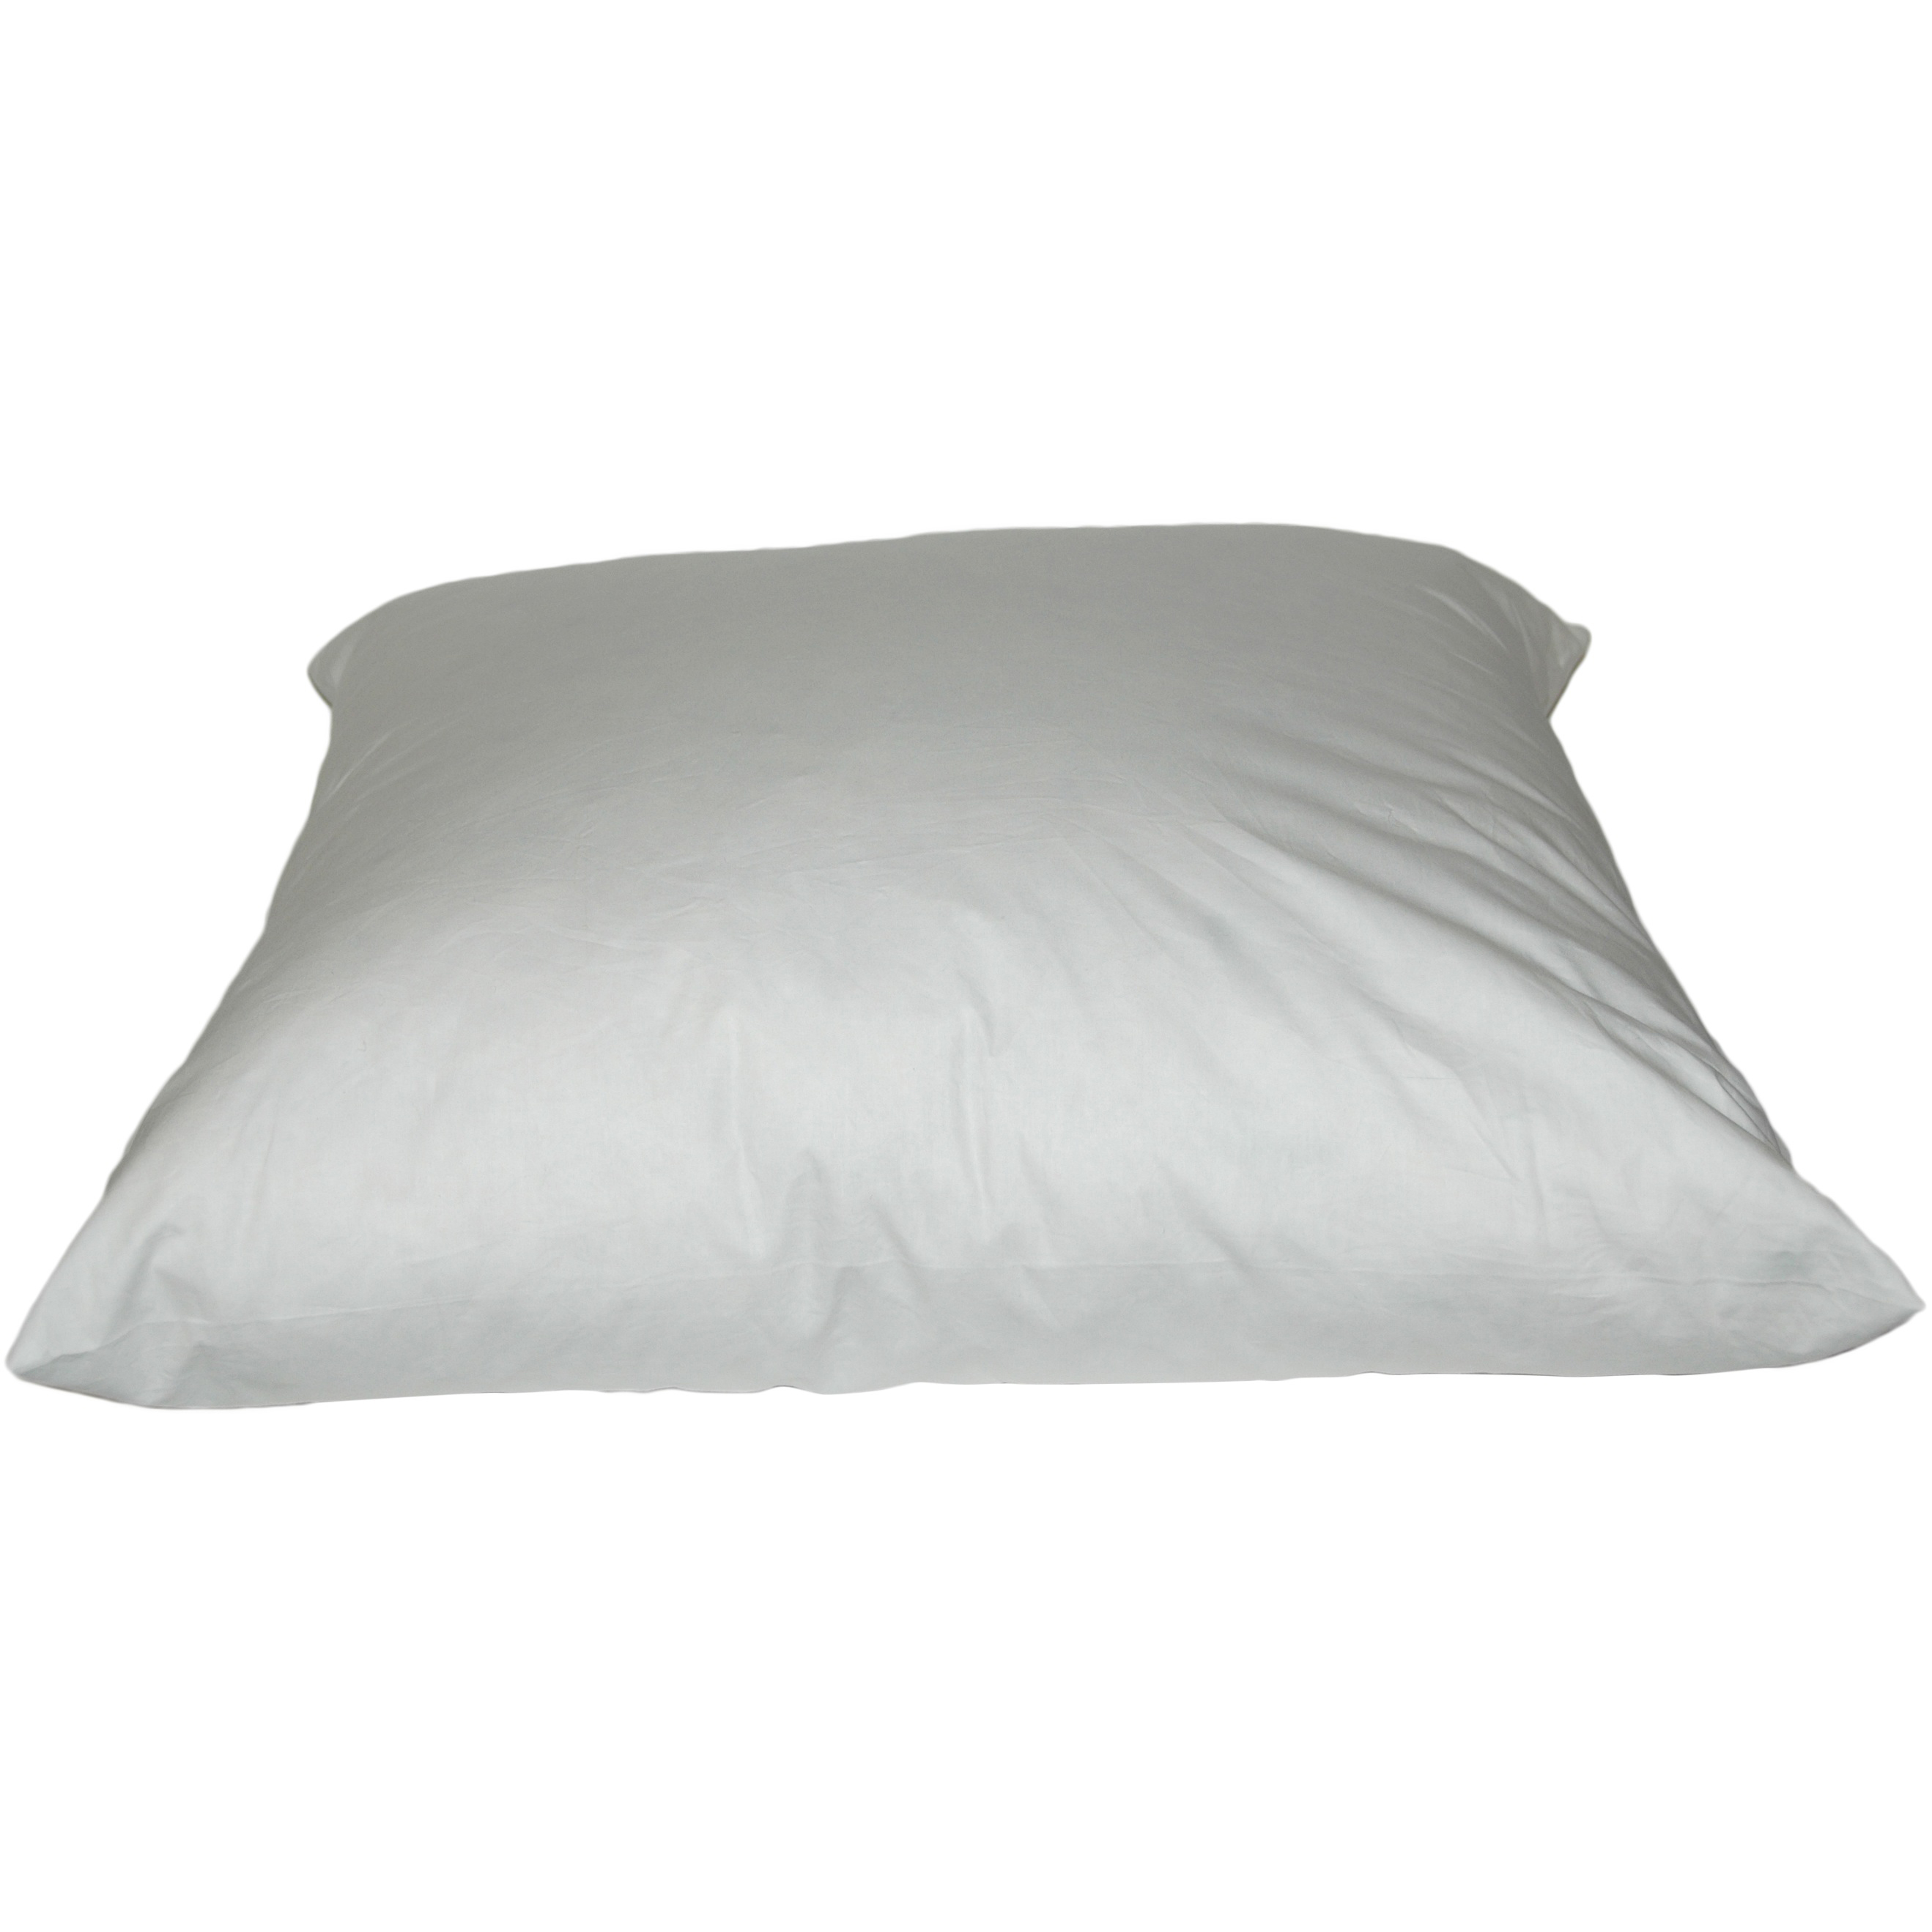 Down & Feather Pillows 50/50 Blend 16 inch